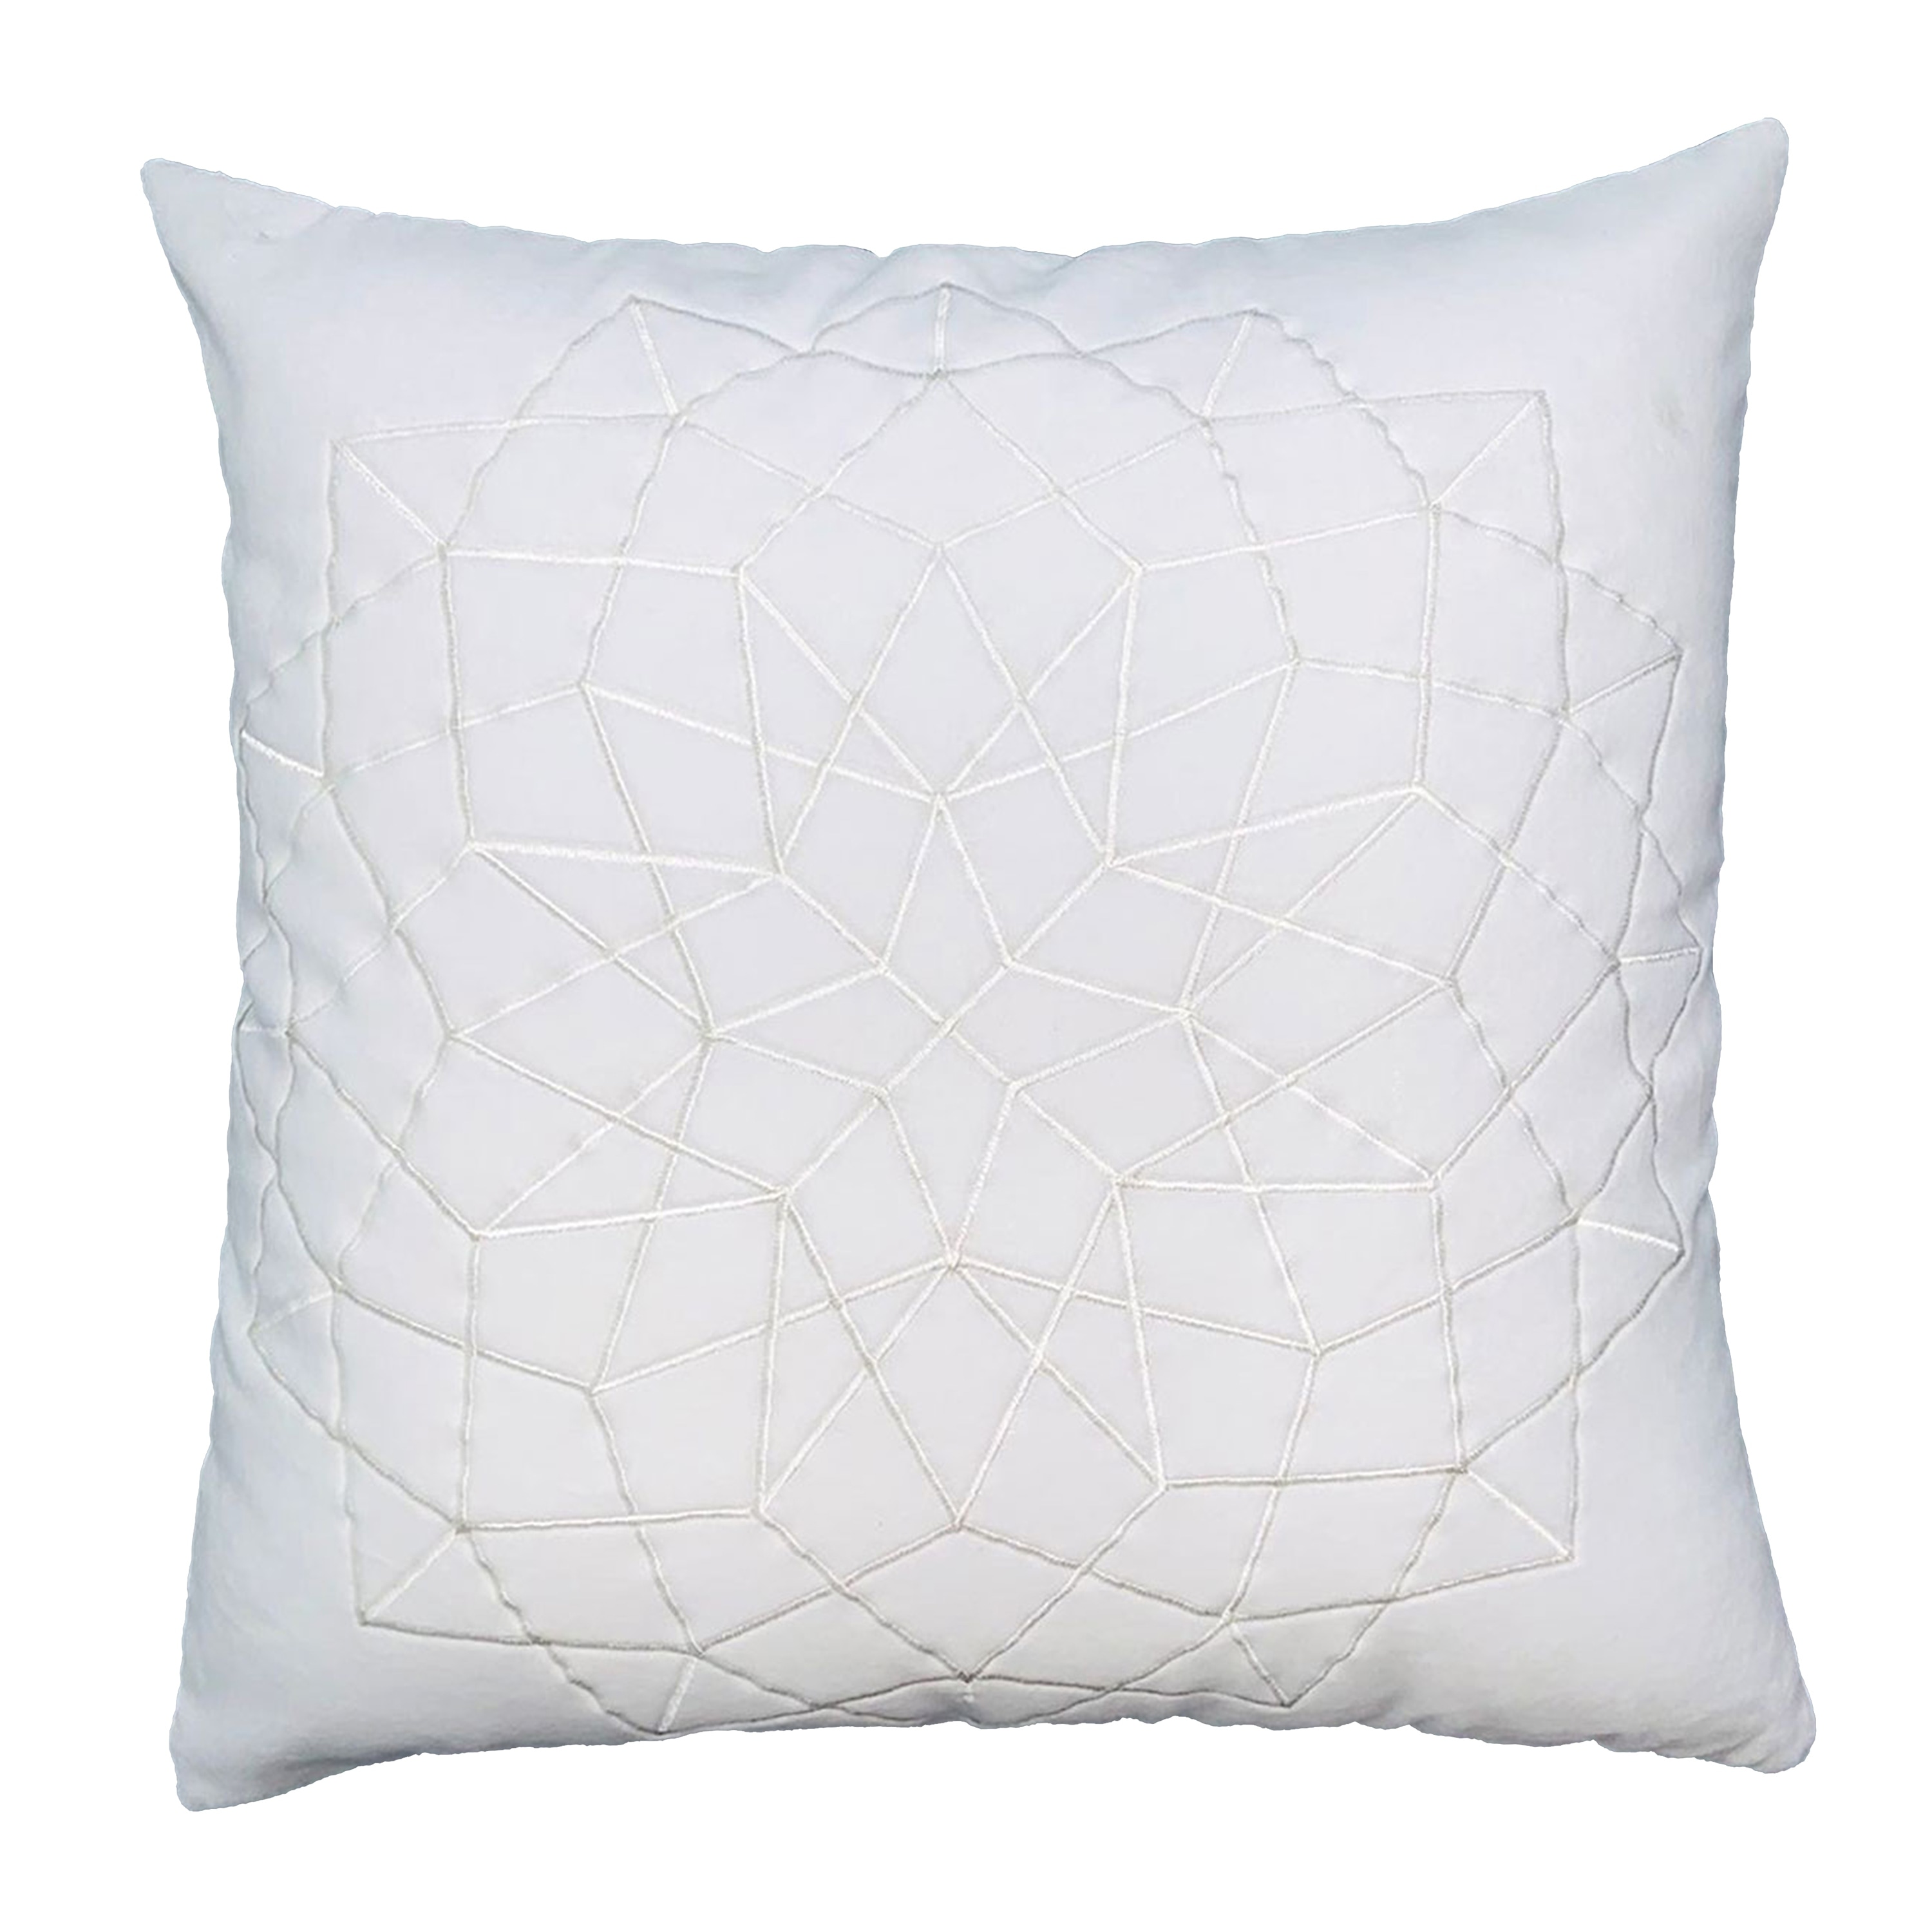 Geometric White Quilted Pillow Cover, 20x20